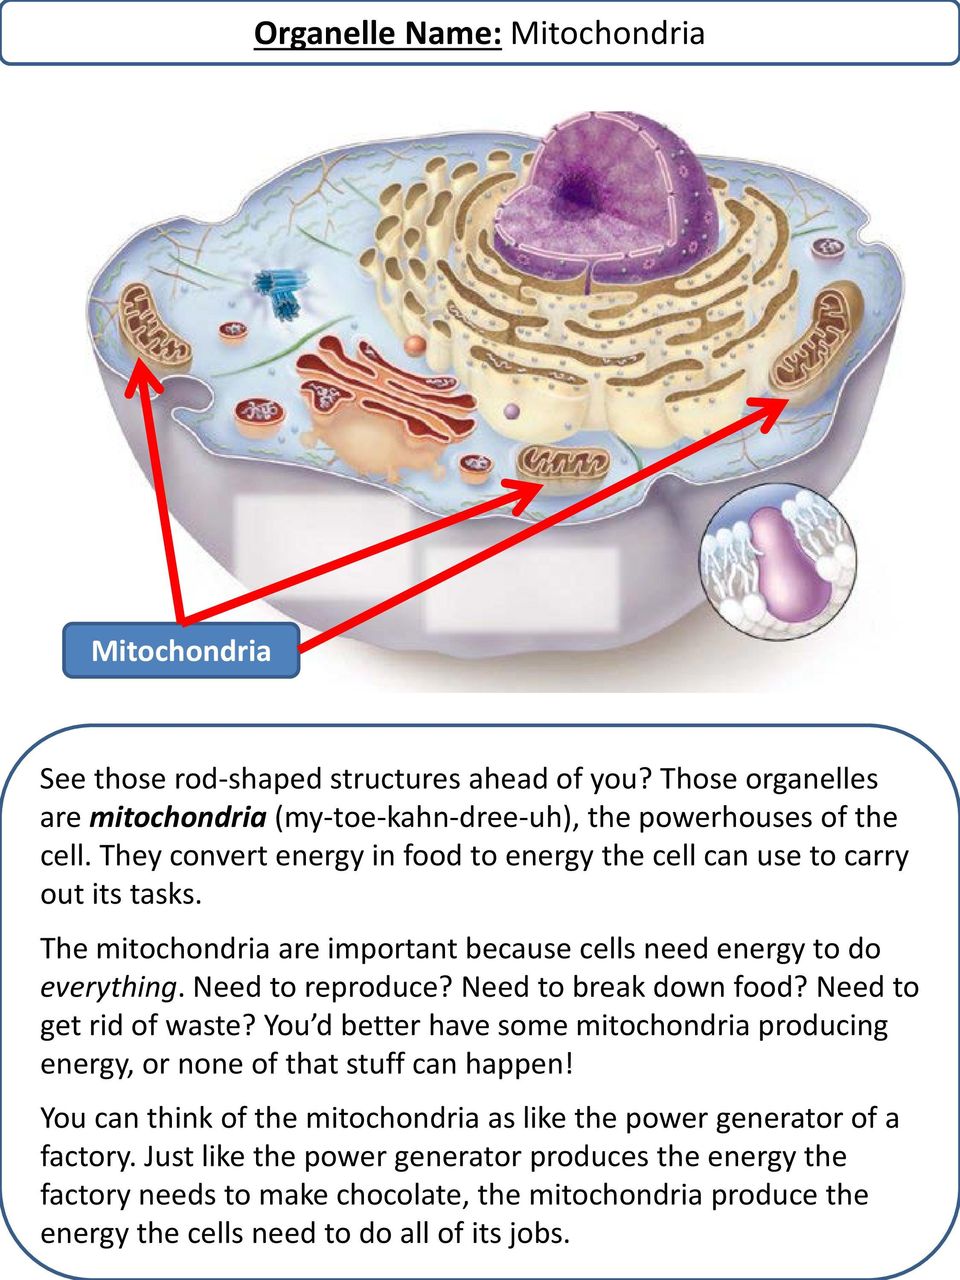 Need to break down food? Need to get rid of waste? You d better have some mitochondria producing energy, or none of that stuff can happen!